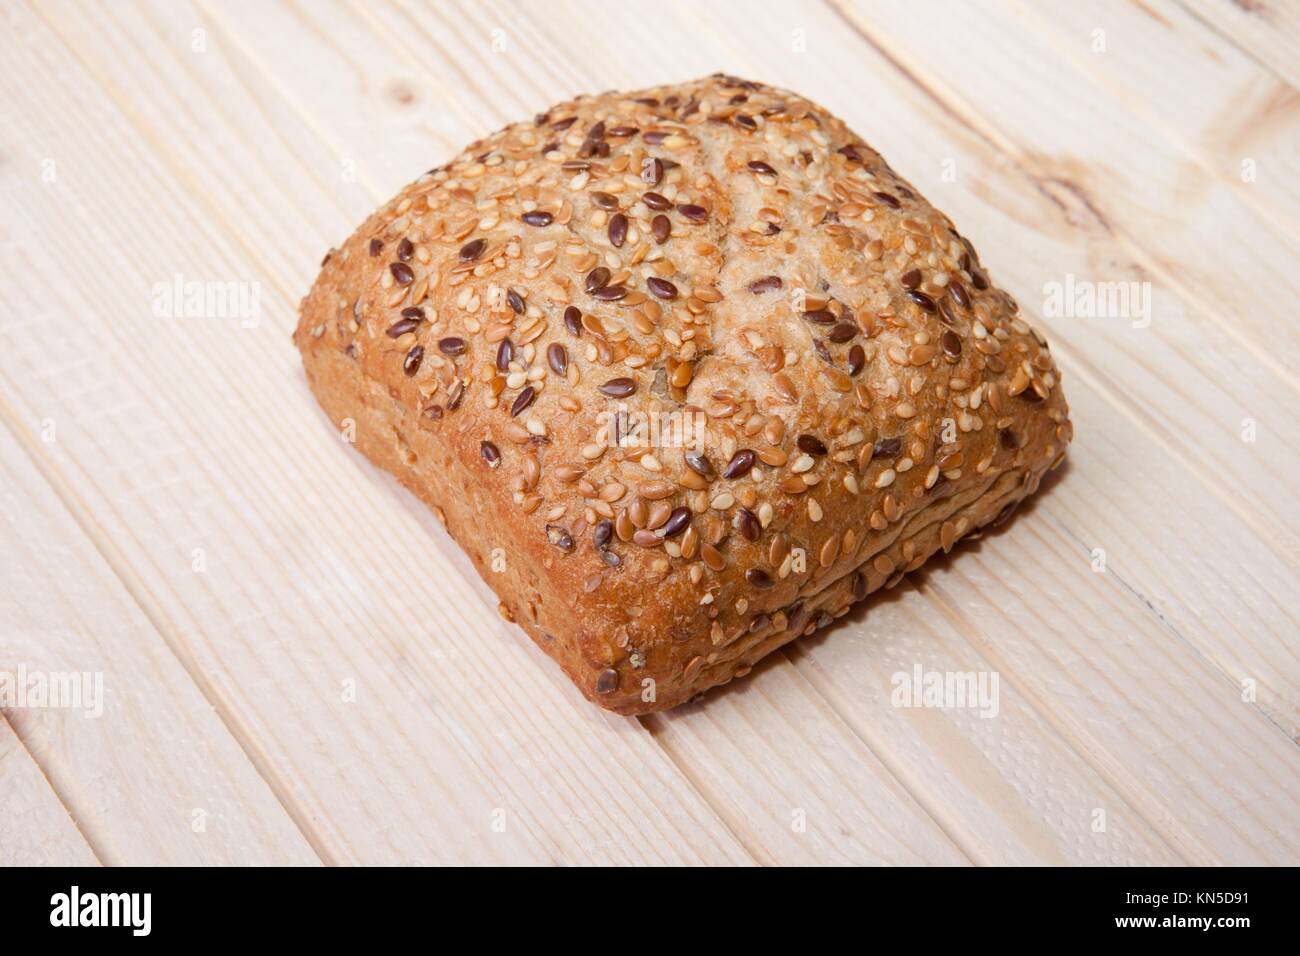 Fresh, squared wholemeal bread with sunflower seeds, sesame and others grains. Isolated over light wooden surface. Stock Photo